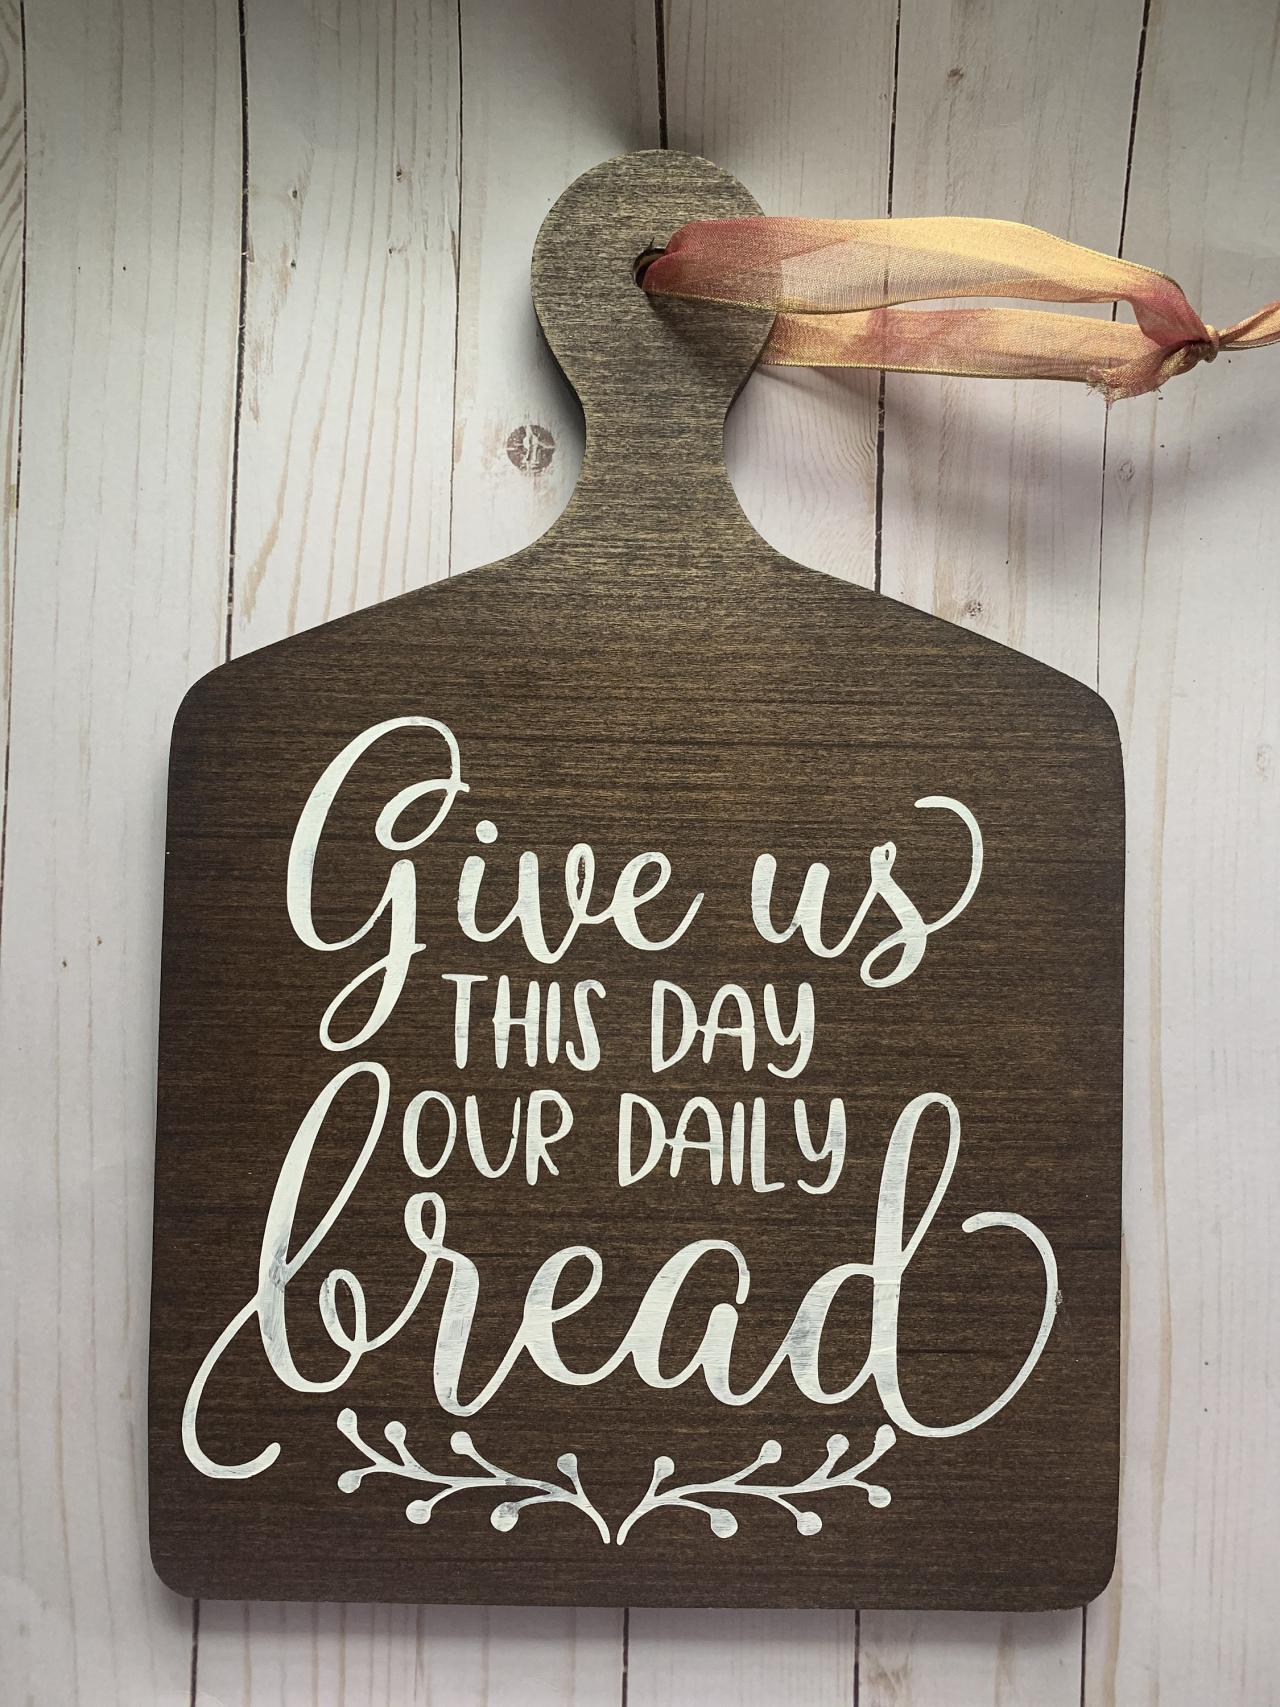 Give Us This Day Our Daily Bread. Wood Decorative Cutting Board. 12x14 Inches